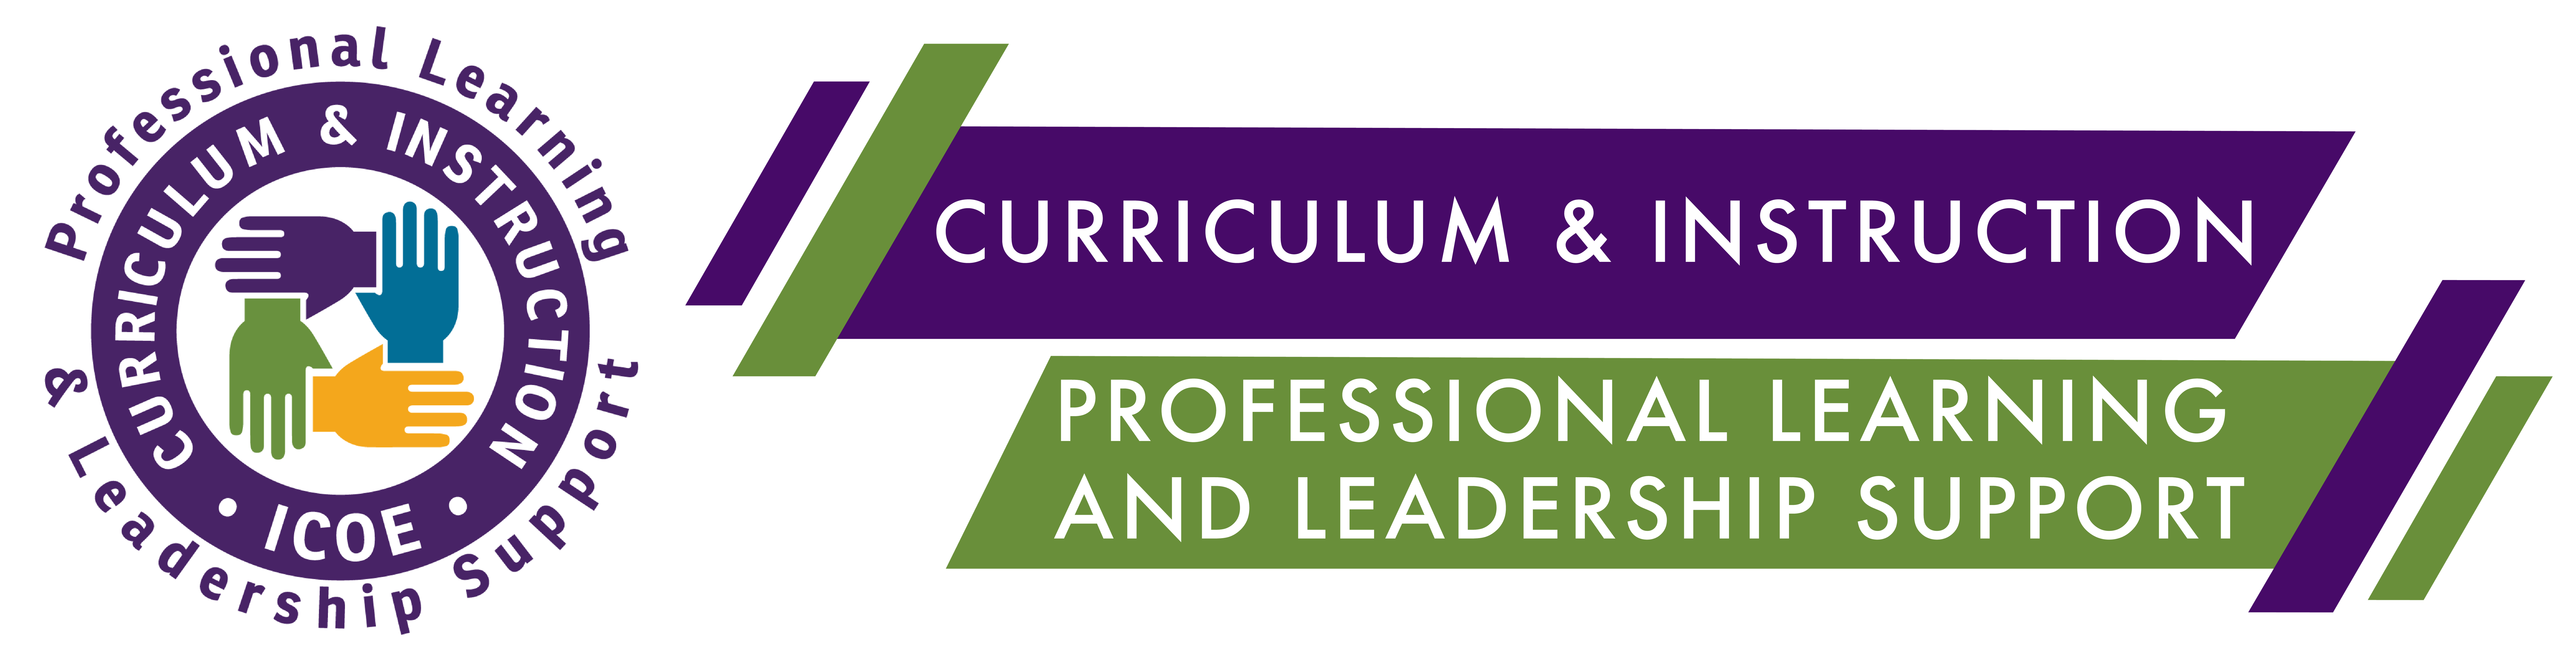 Welcome to Curriculum and Instruction Professional Learning and Leadership Support Banner